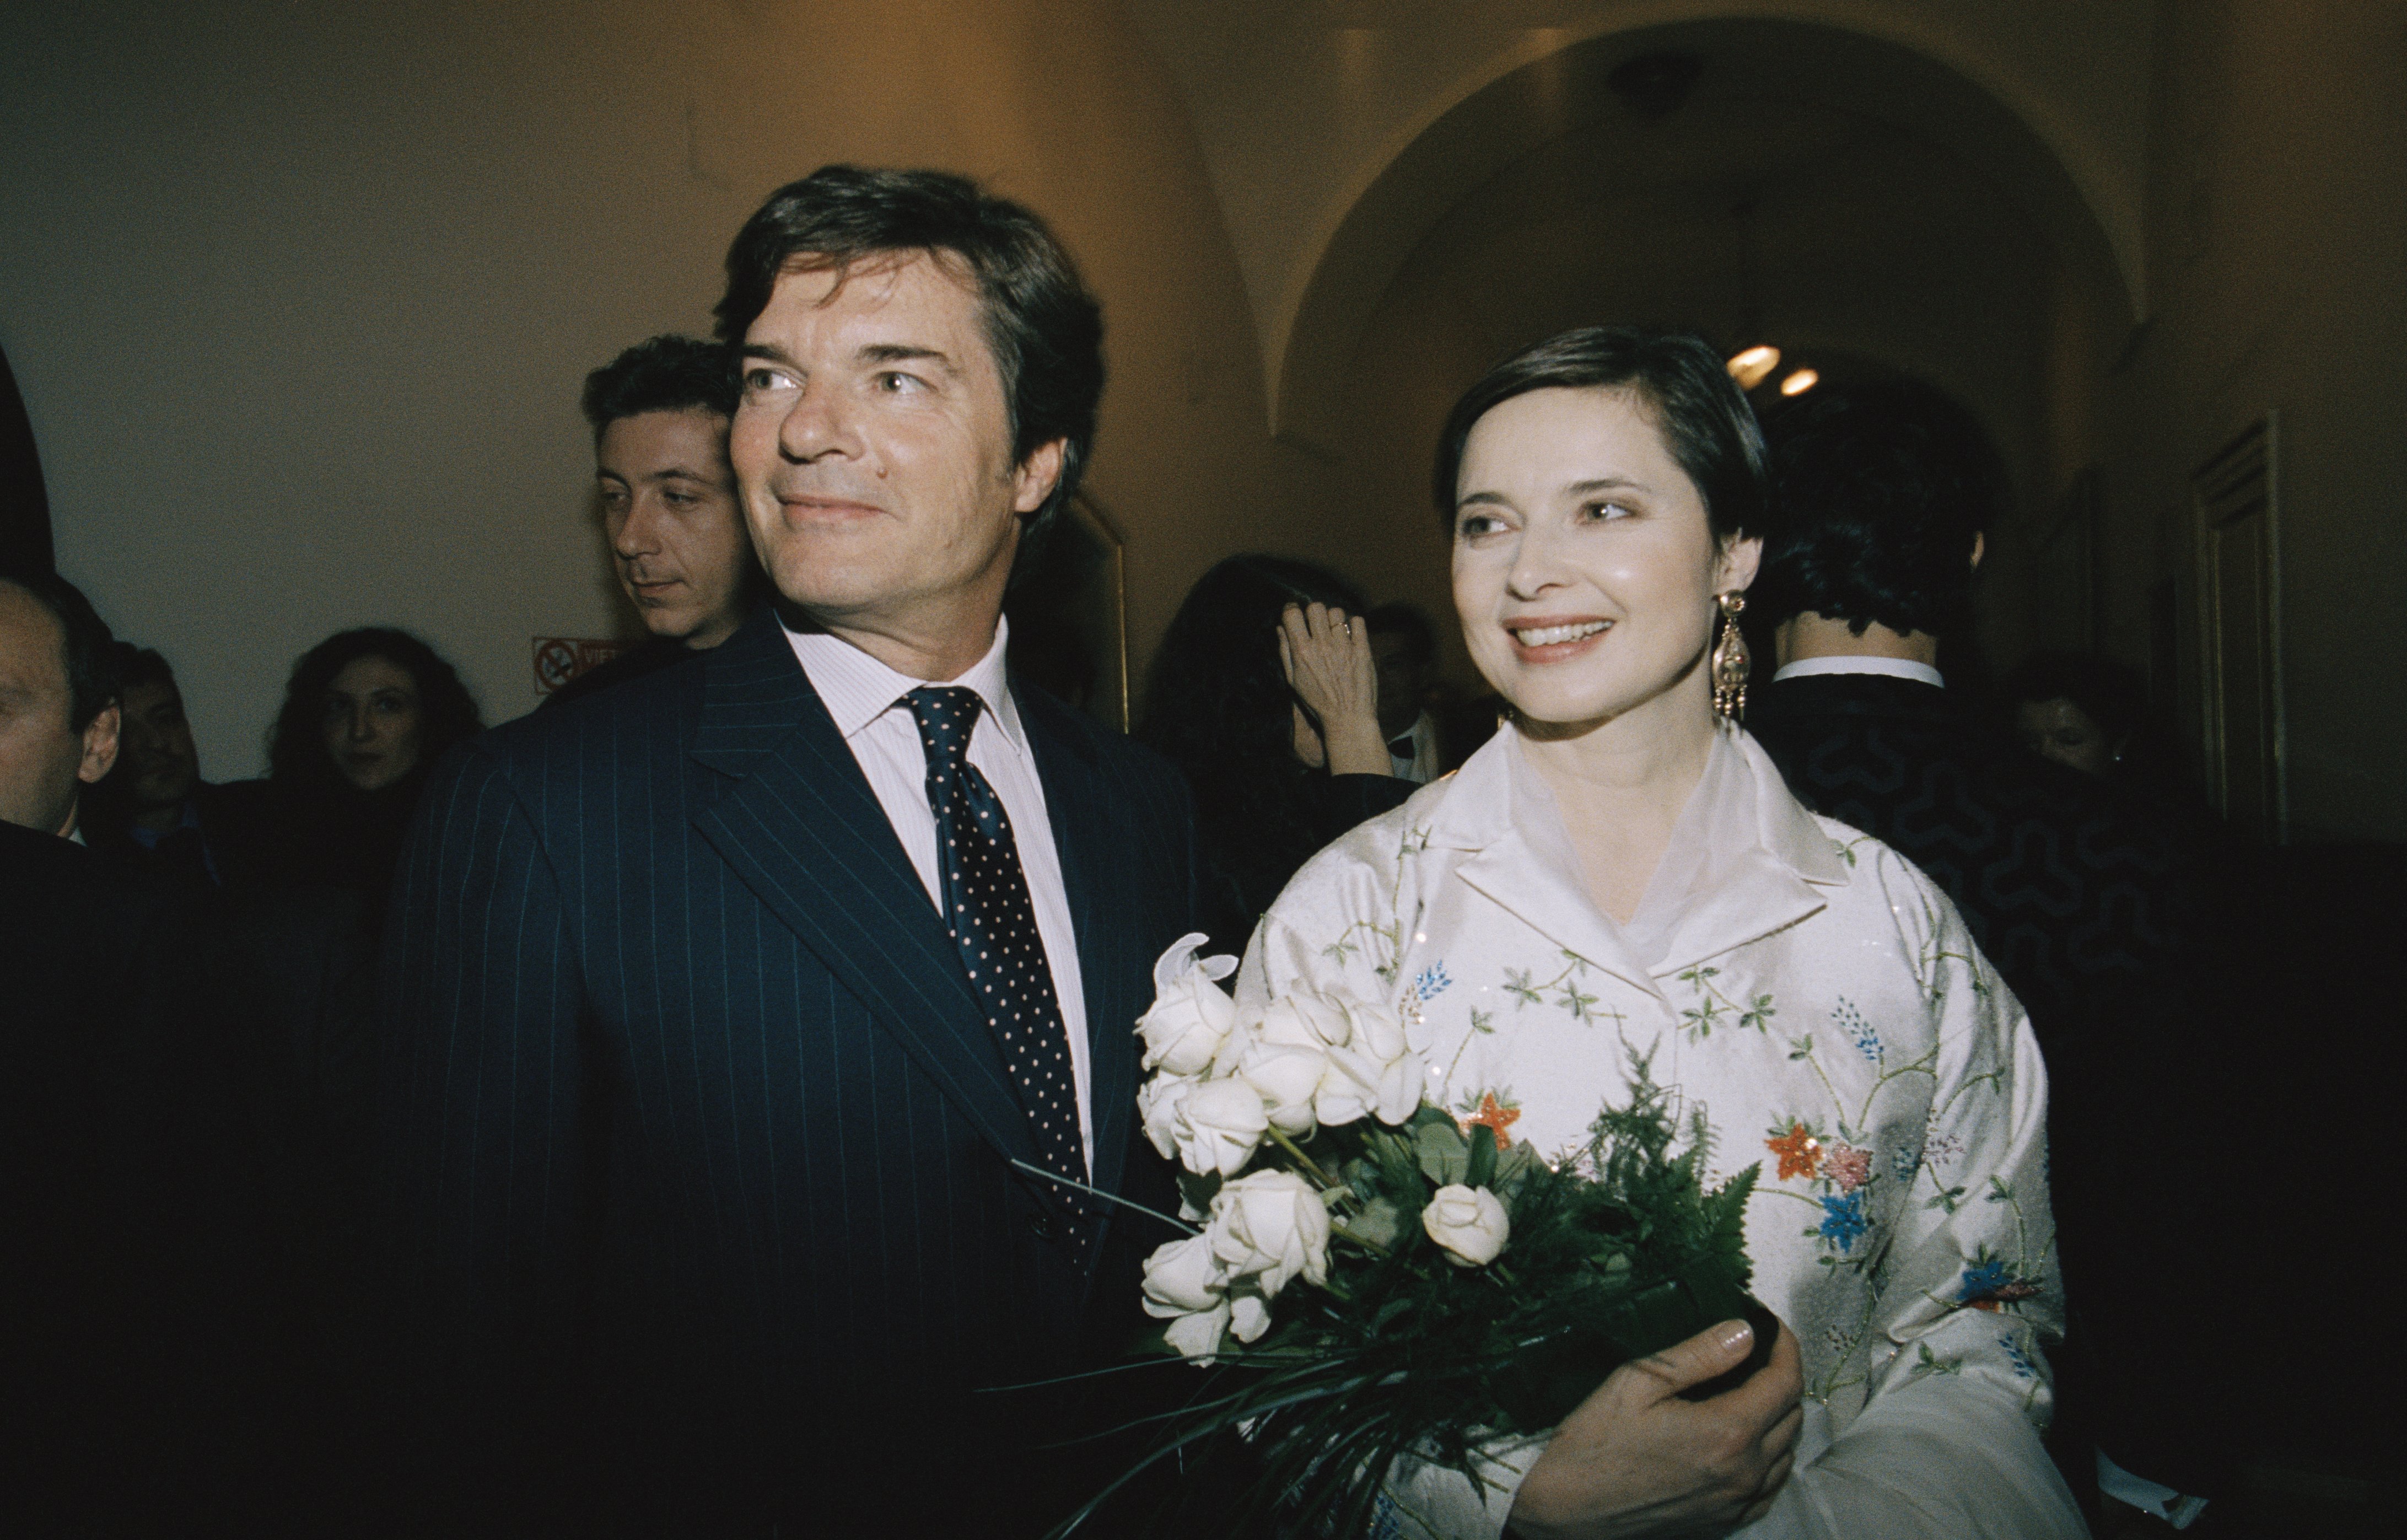 Robertino Rossellini and Isabella Rossellini at the operas Oedipus Rex and Persephone premiere on January 19, 2001, in Naples | Source: Getty Images